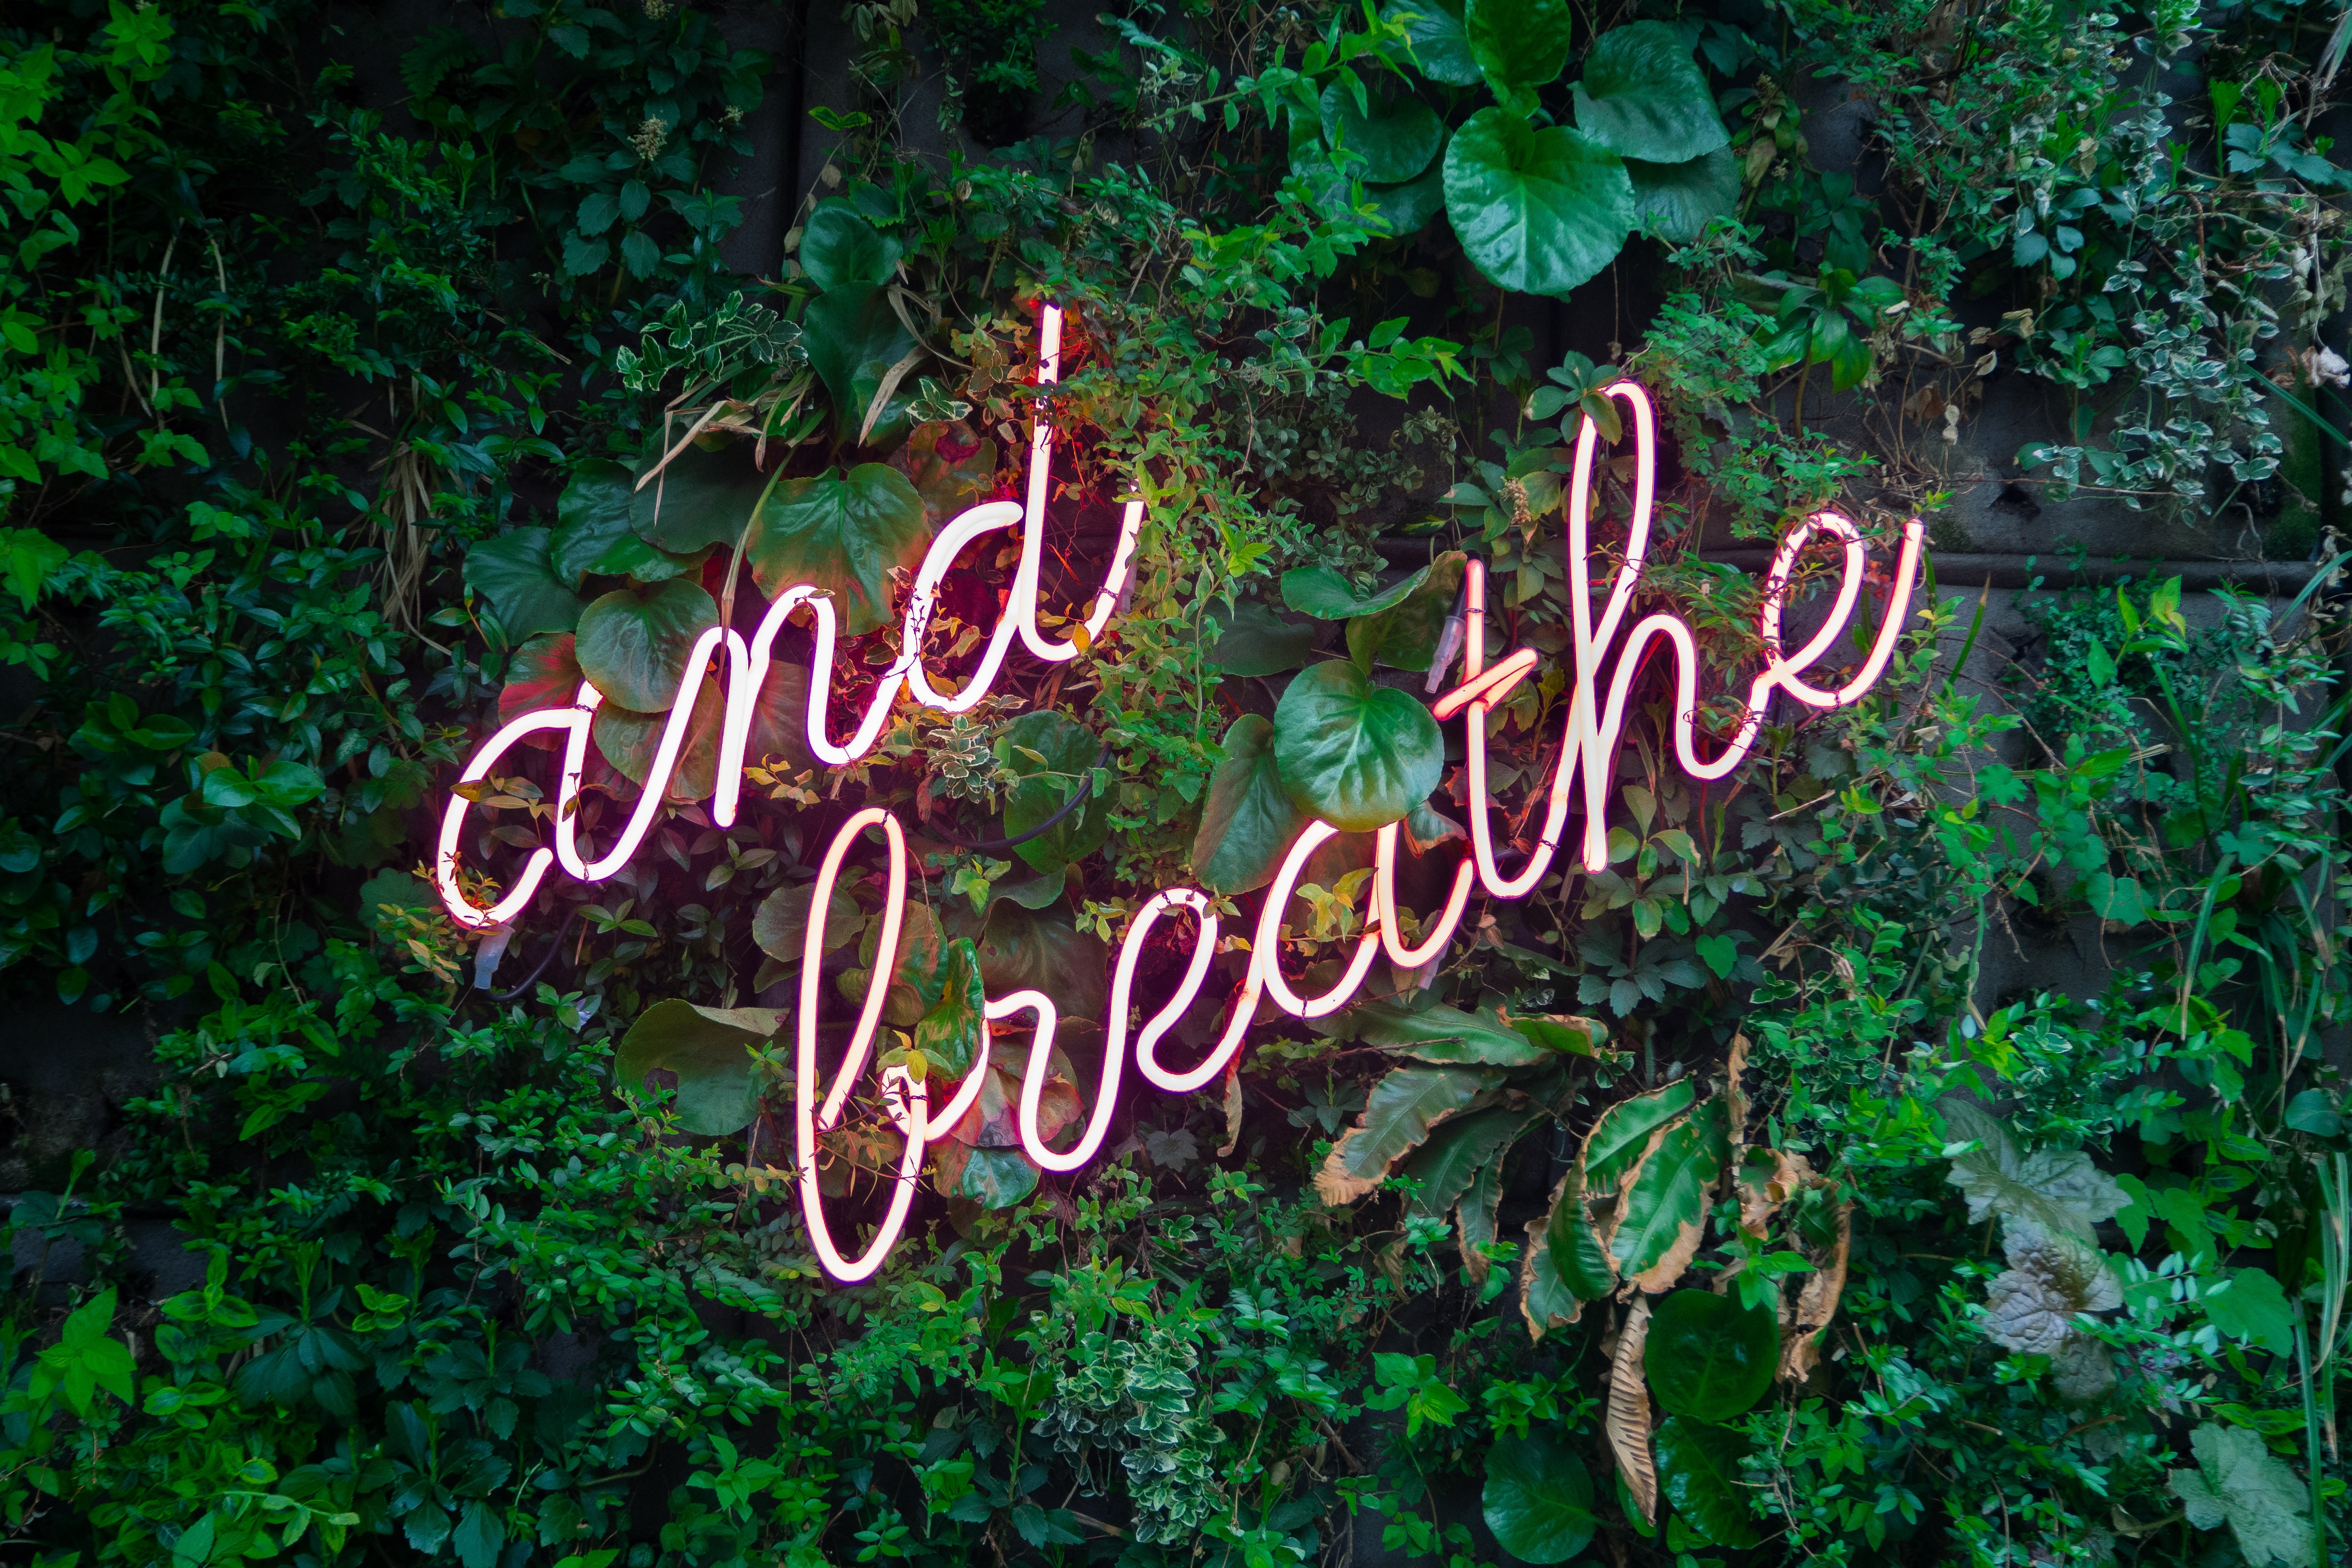 A wall of plants with And Breathe written in neon.